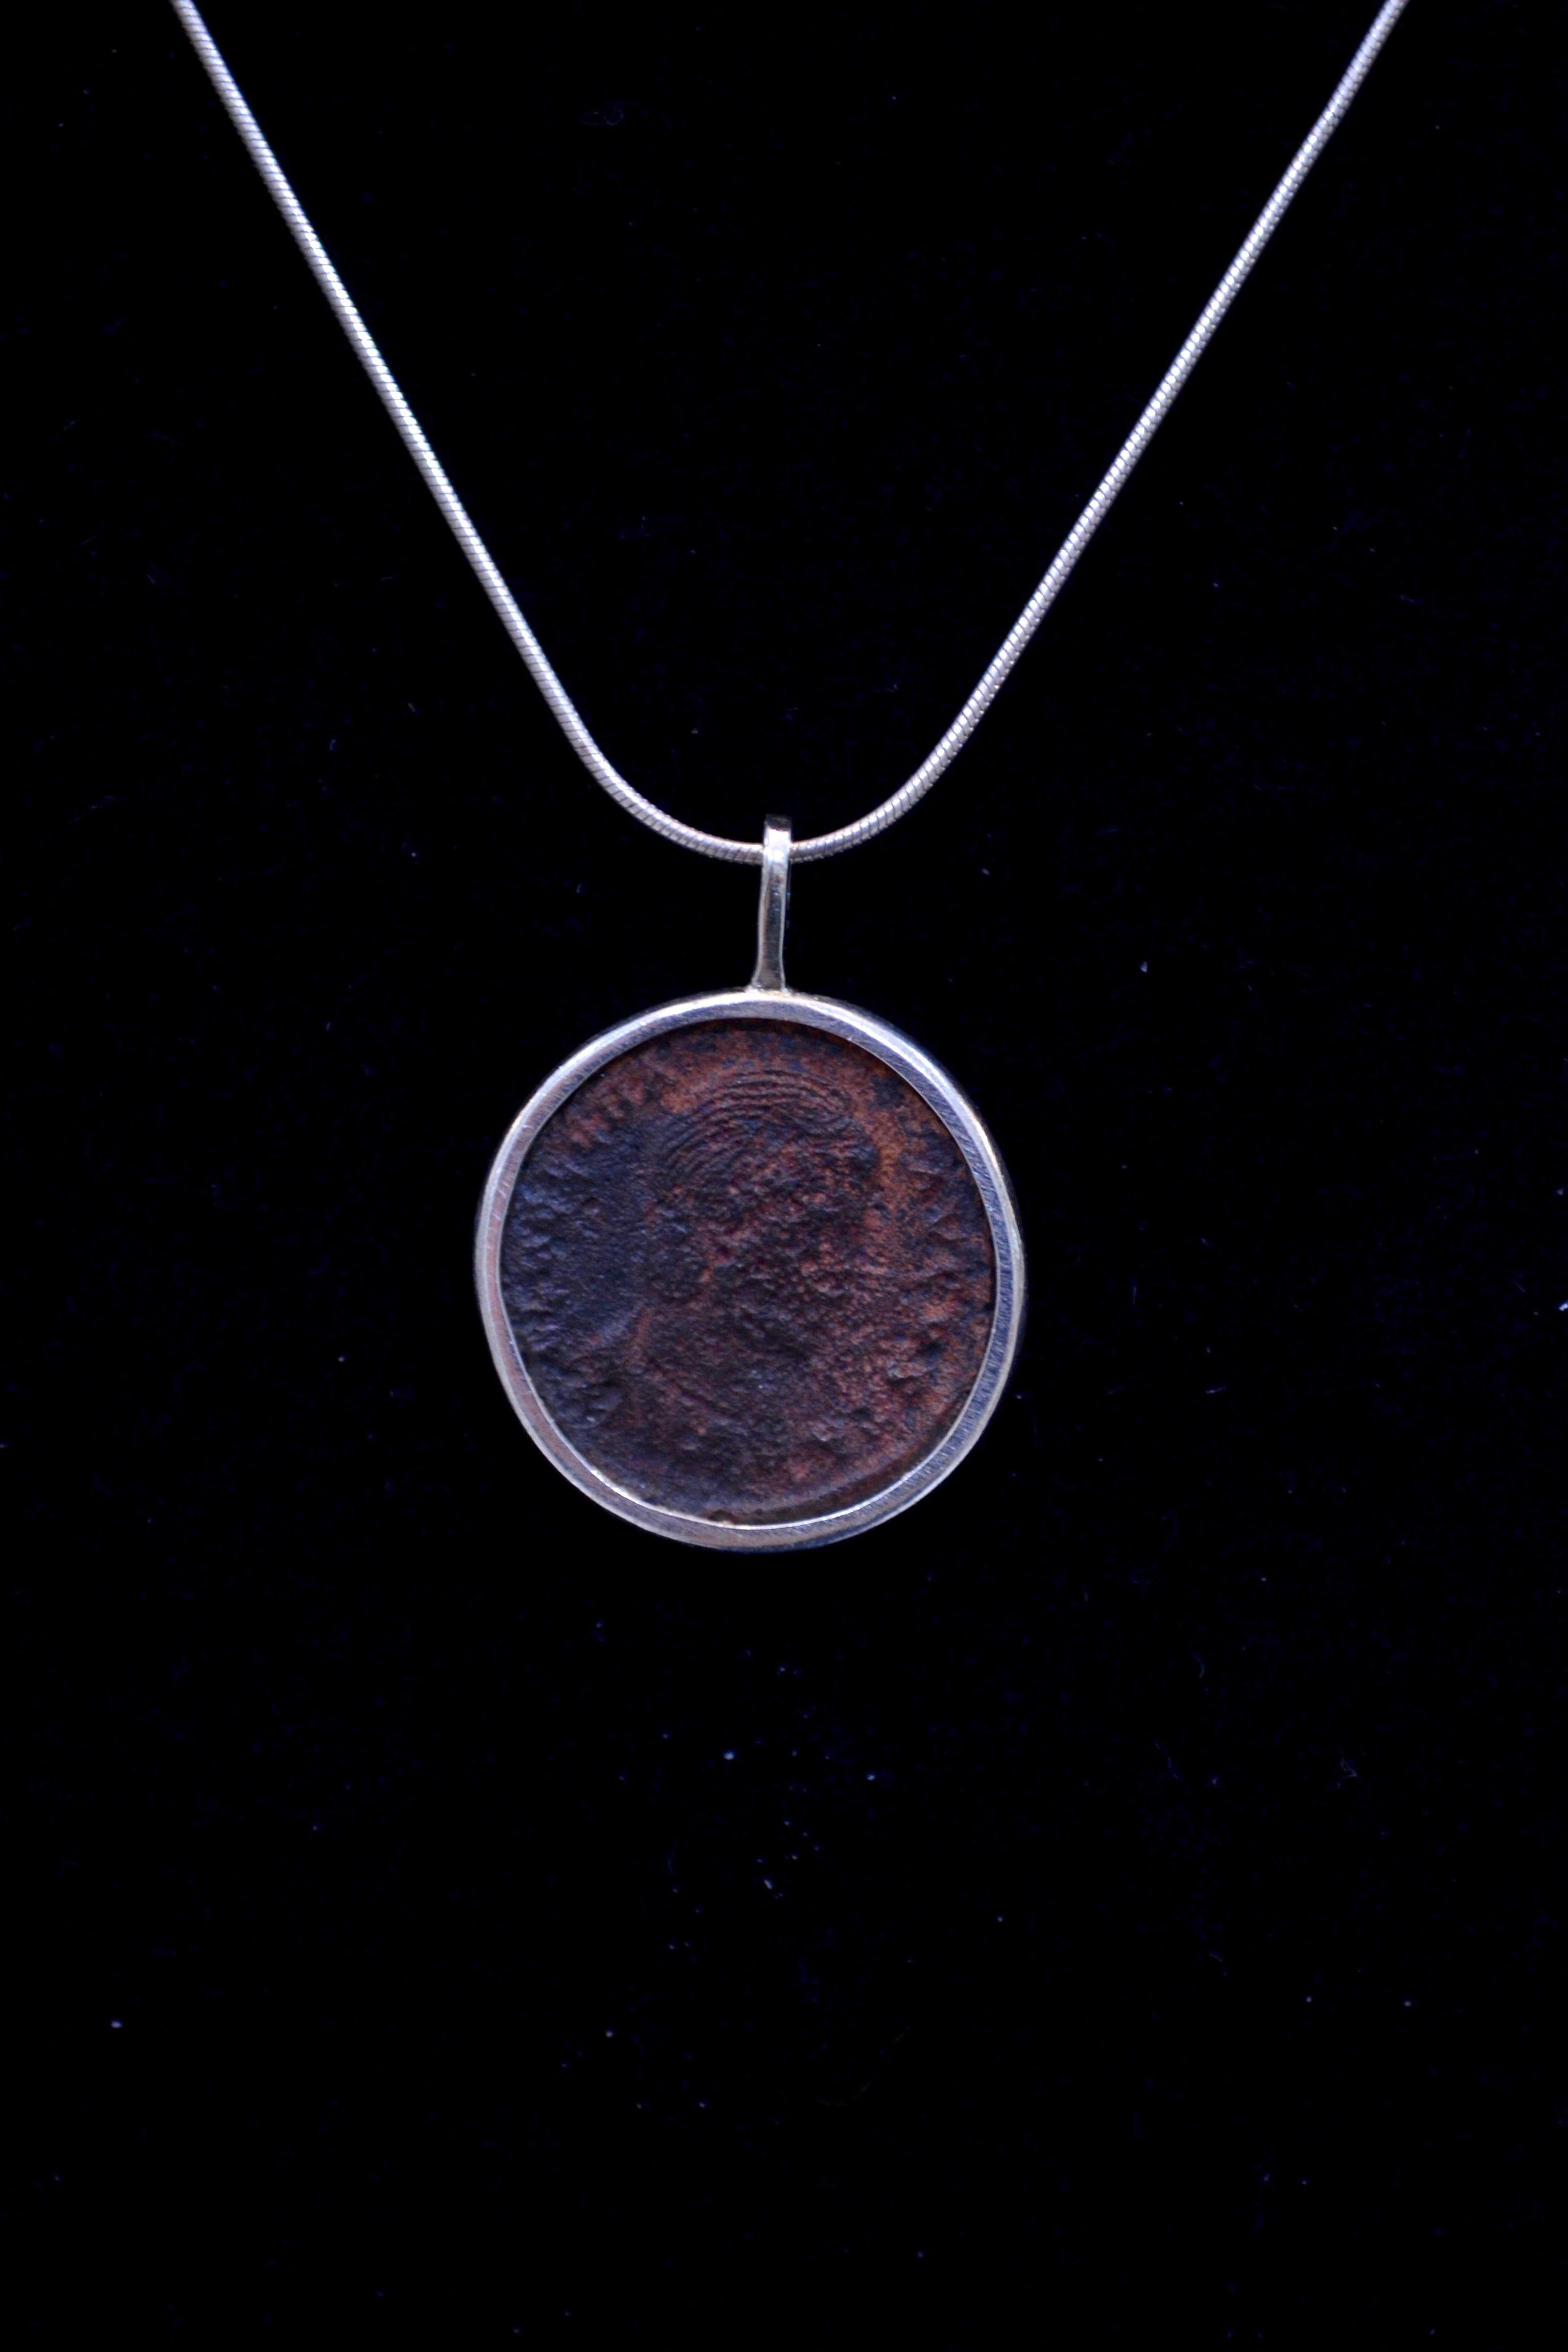 Authentic Roman bronze coin Ca. 27 BC - 476 CE mounted on contemporary silver necklace. Ready to be worn!

Bronze coin from the great Roman Empire that dates back nearly 2,000 years.  Beautiful iridescence.